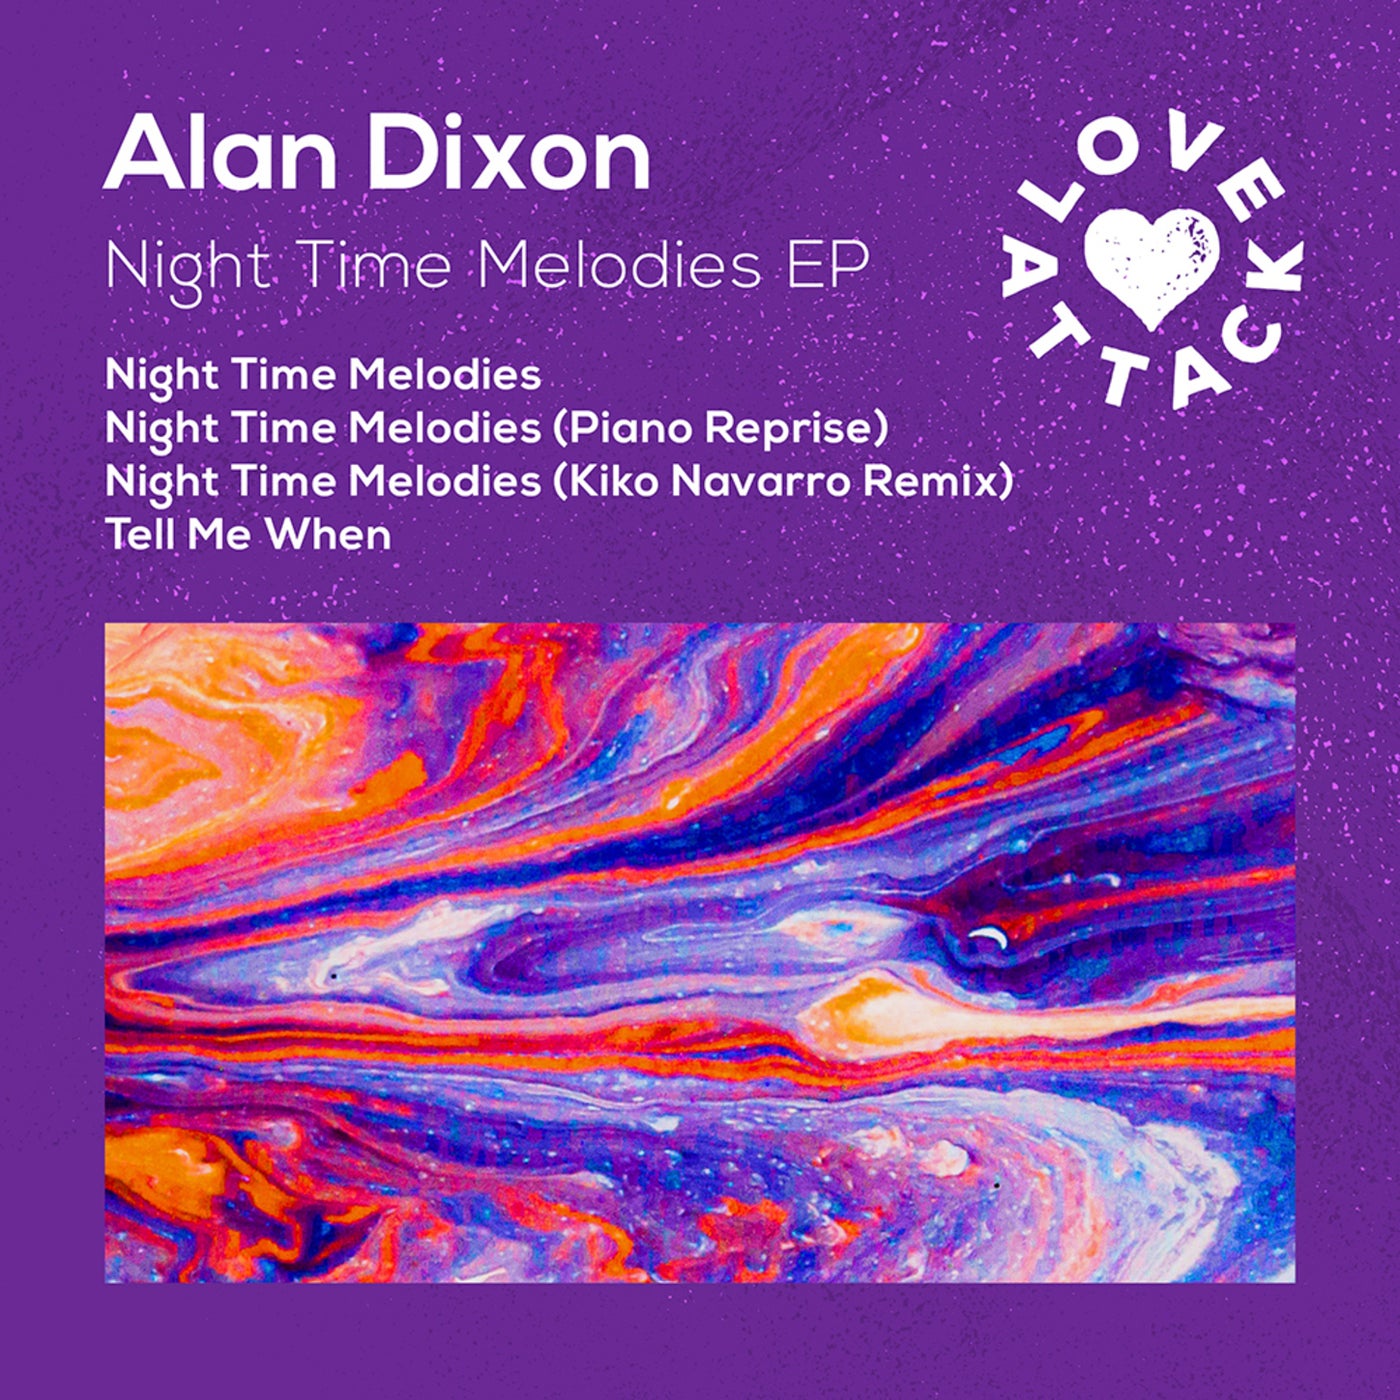 Night Time Melodies EP